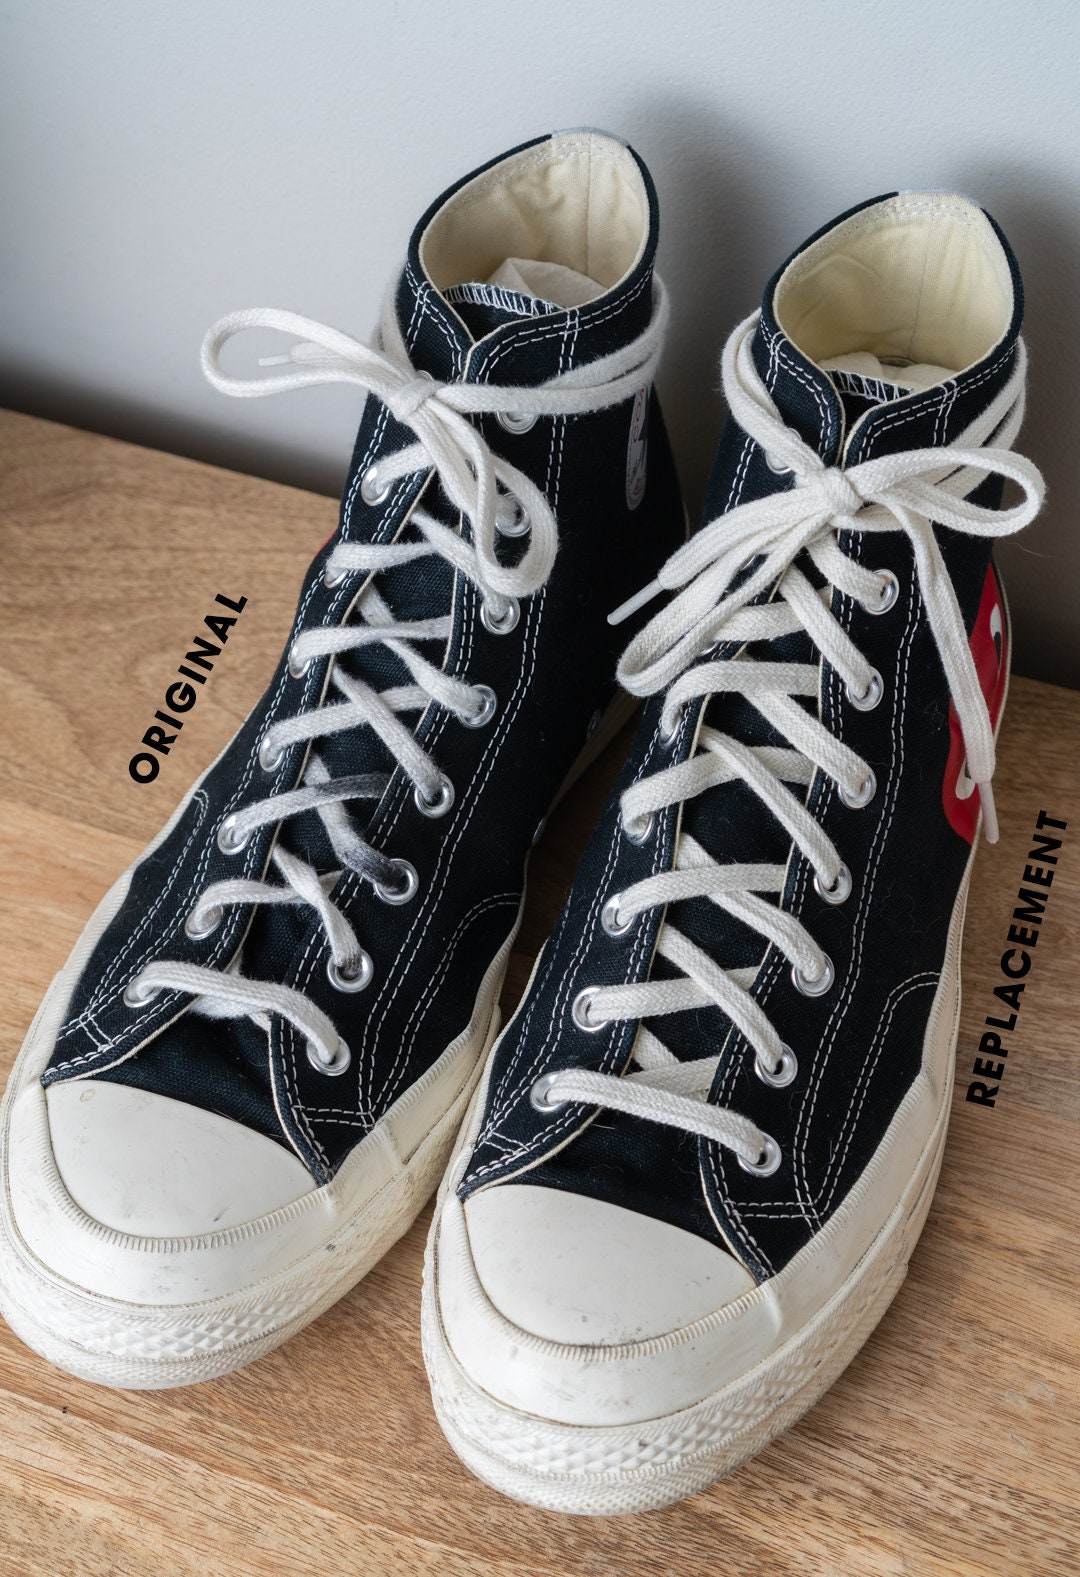 Replacement Converse Chuck 70s High Top Laces Extra Long 72 Inches / 63 ...